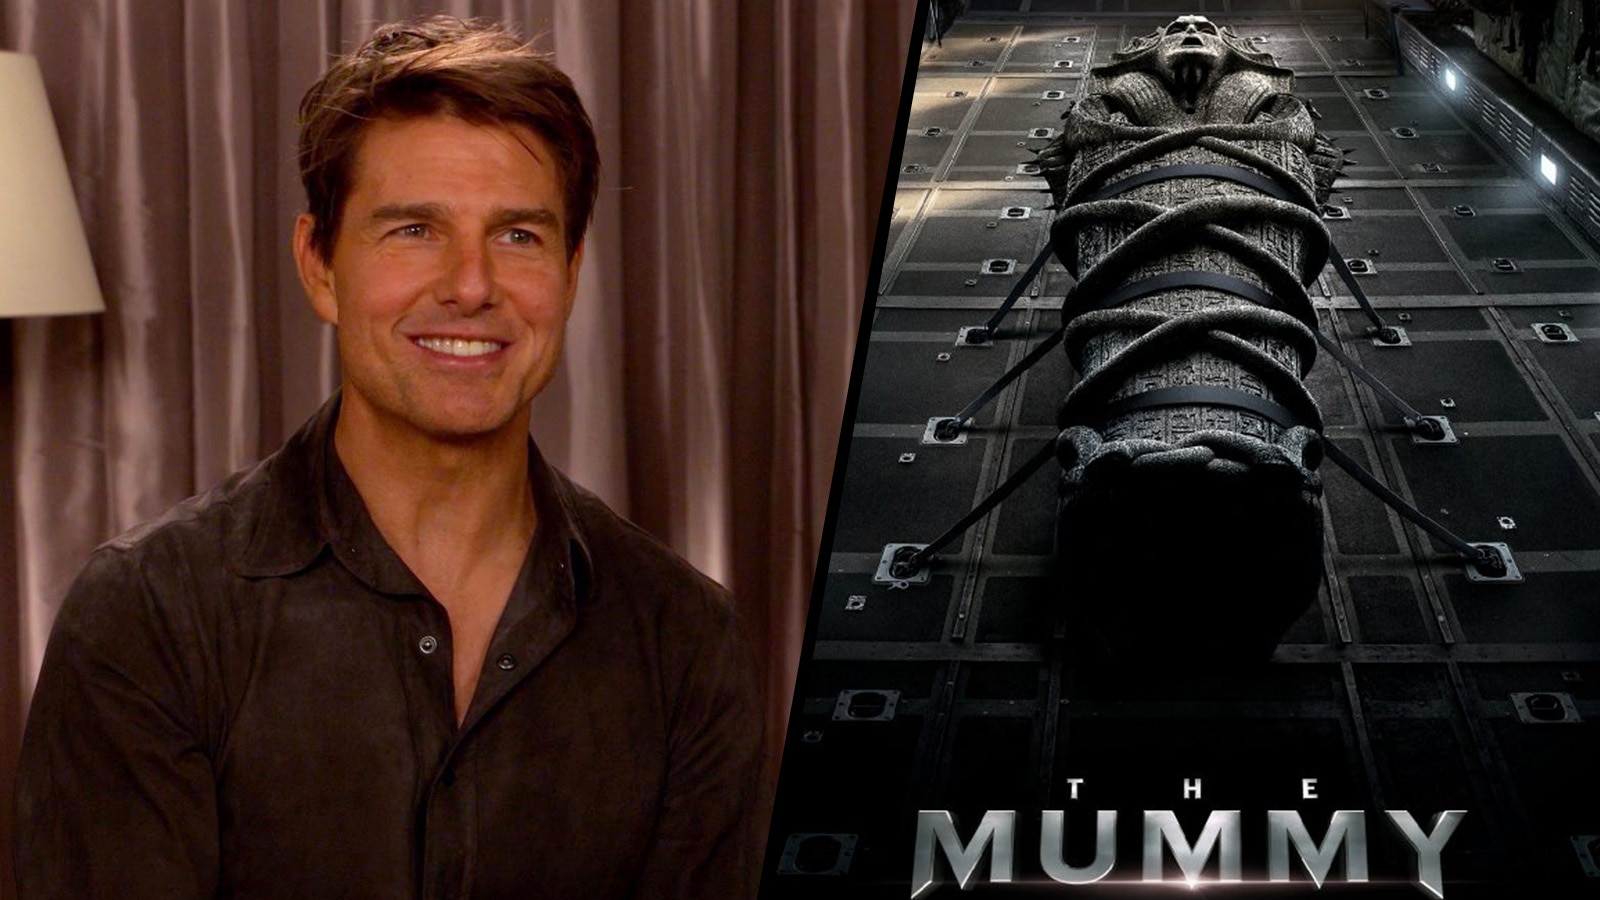 Watch Access Hollywood Interview The Mummy Tom Cruise On His Intense Training For The Film